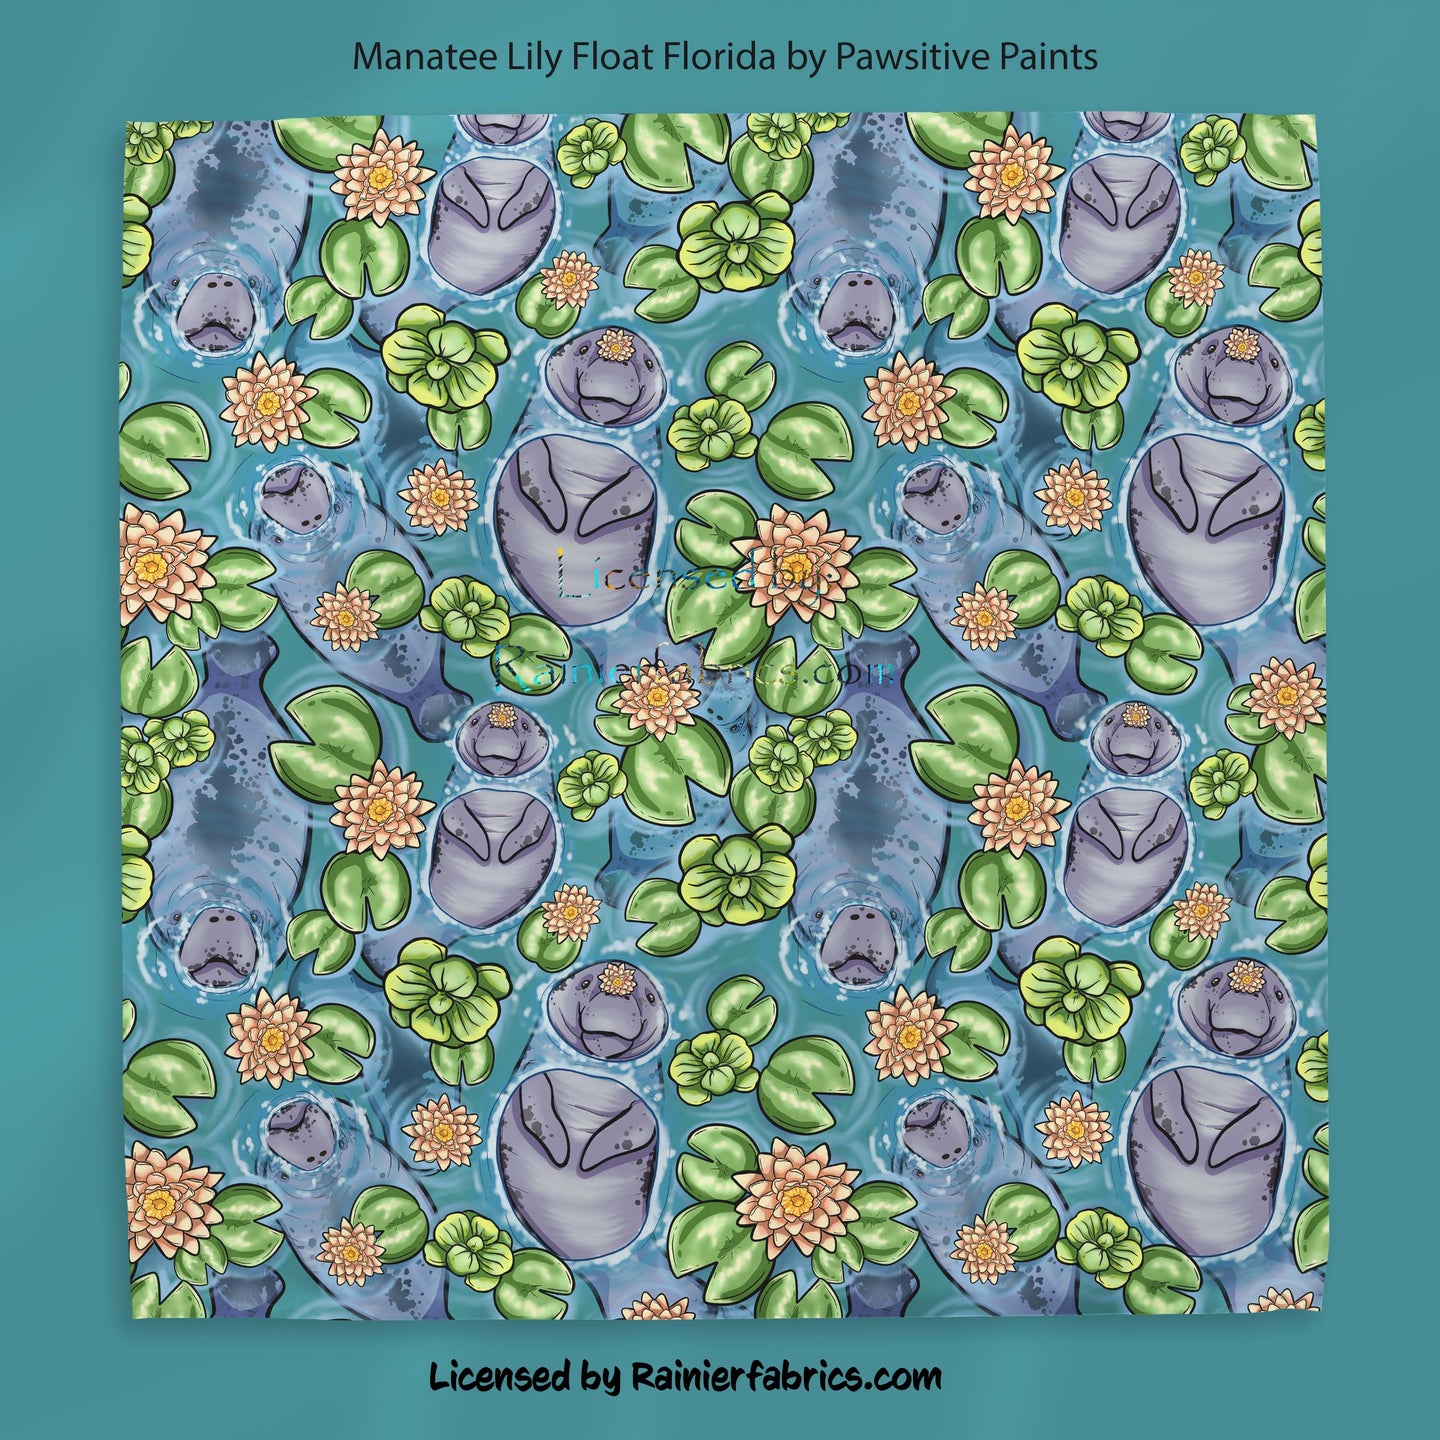 Manatee Lily Float Florida with panel from Pawsitive Paints - 2-5 business days to ship - Order by 1/2 yard